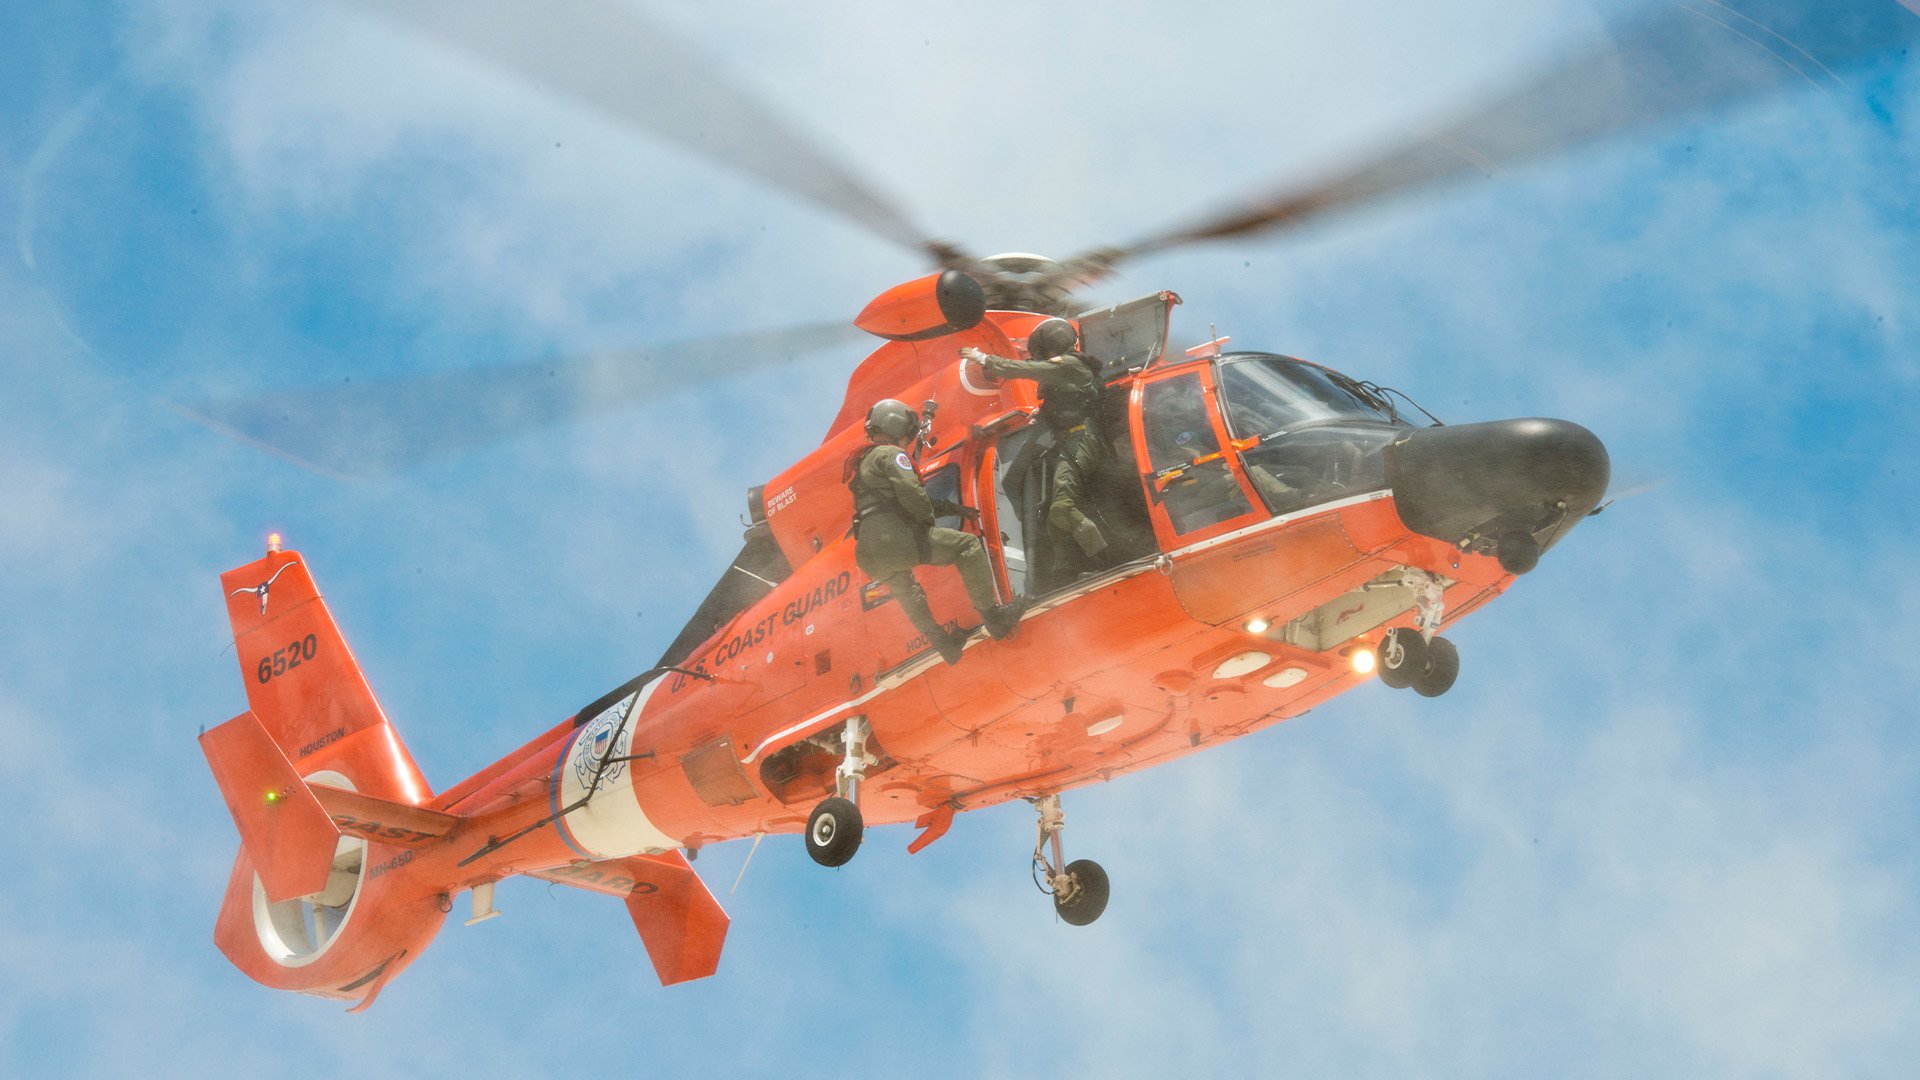 A US Coast Guard crew from Air Station Houston hovers over San Luis Pass, May 24, 2014, part of an effort by first responders to keep people from trying to swim in treacherous waters that had claimed four lives in 2013. US Coast Guard photo.